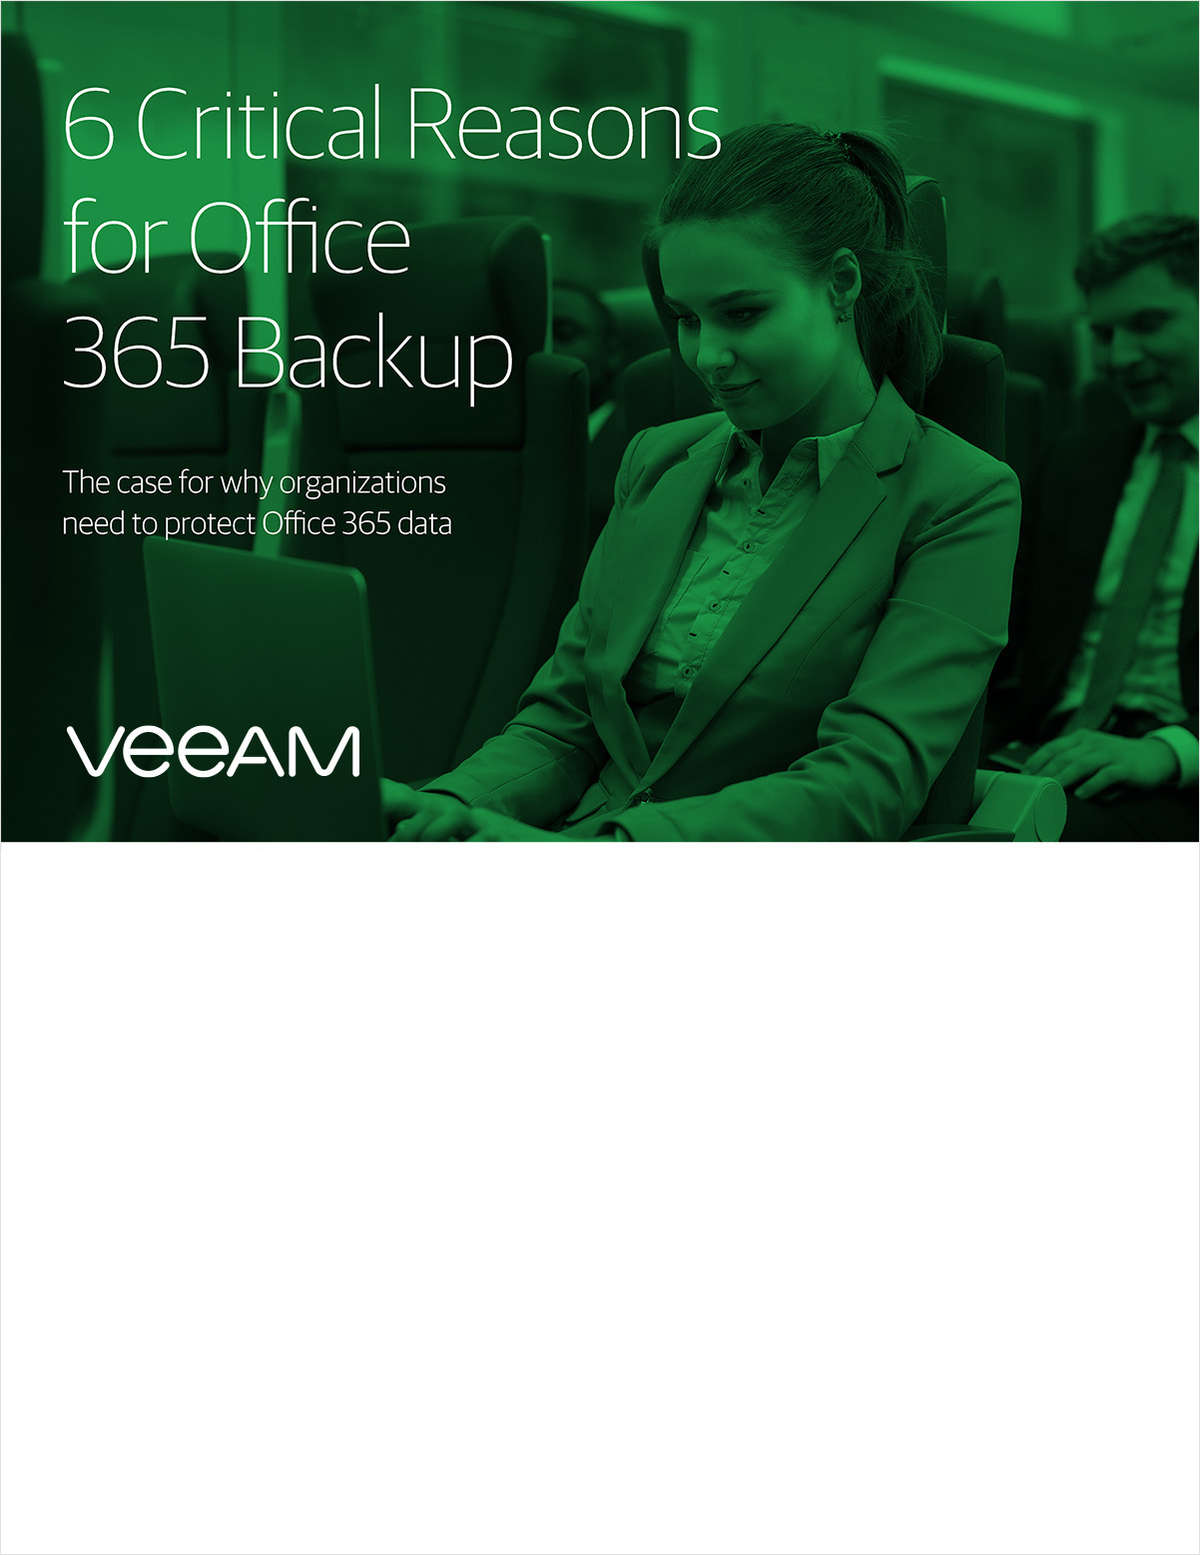 6 Critical Reasons for Office 365 Backup